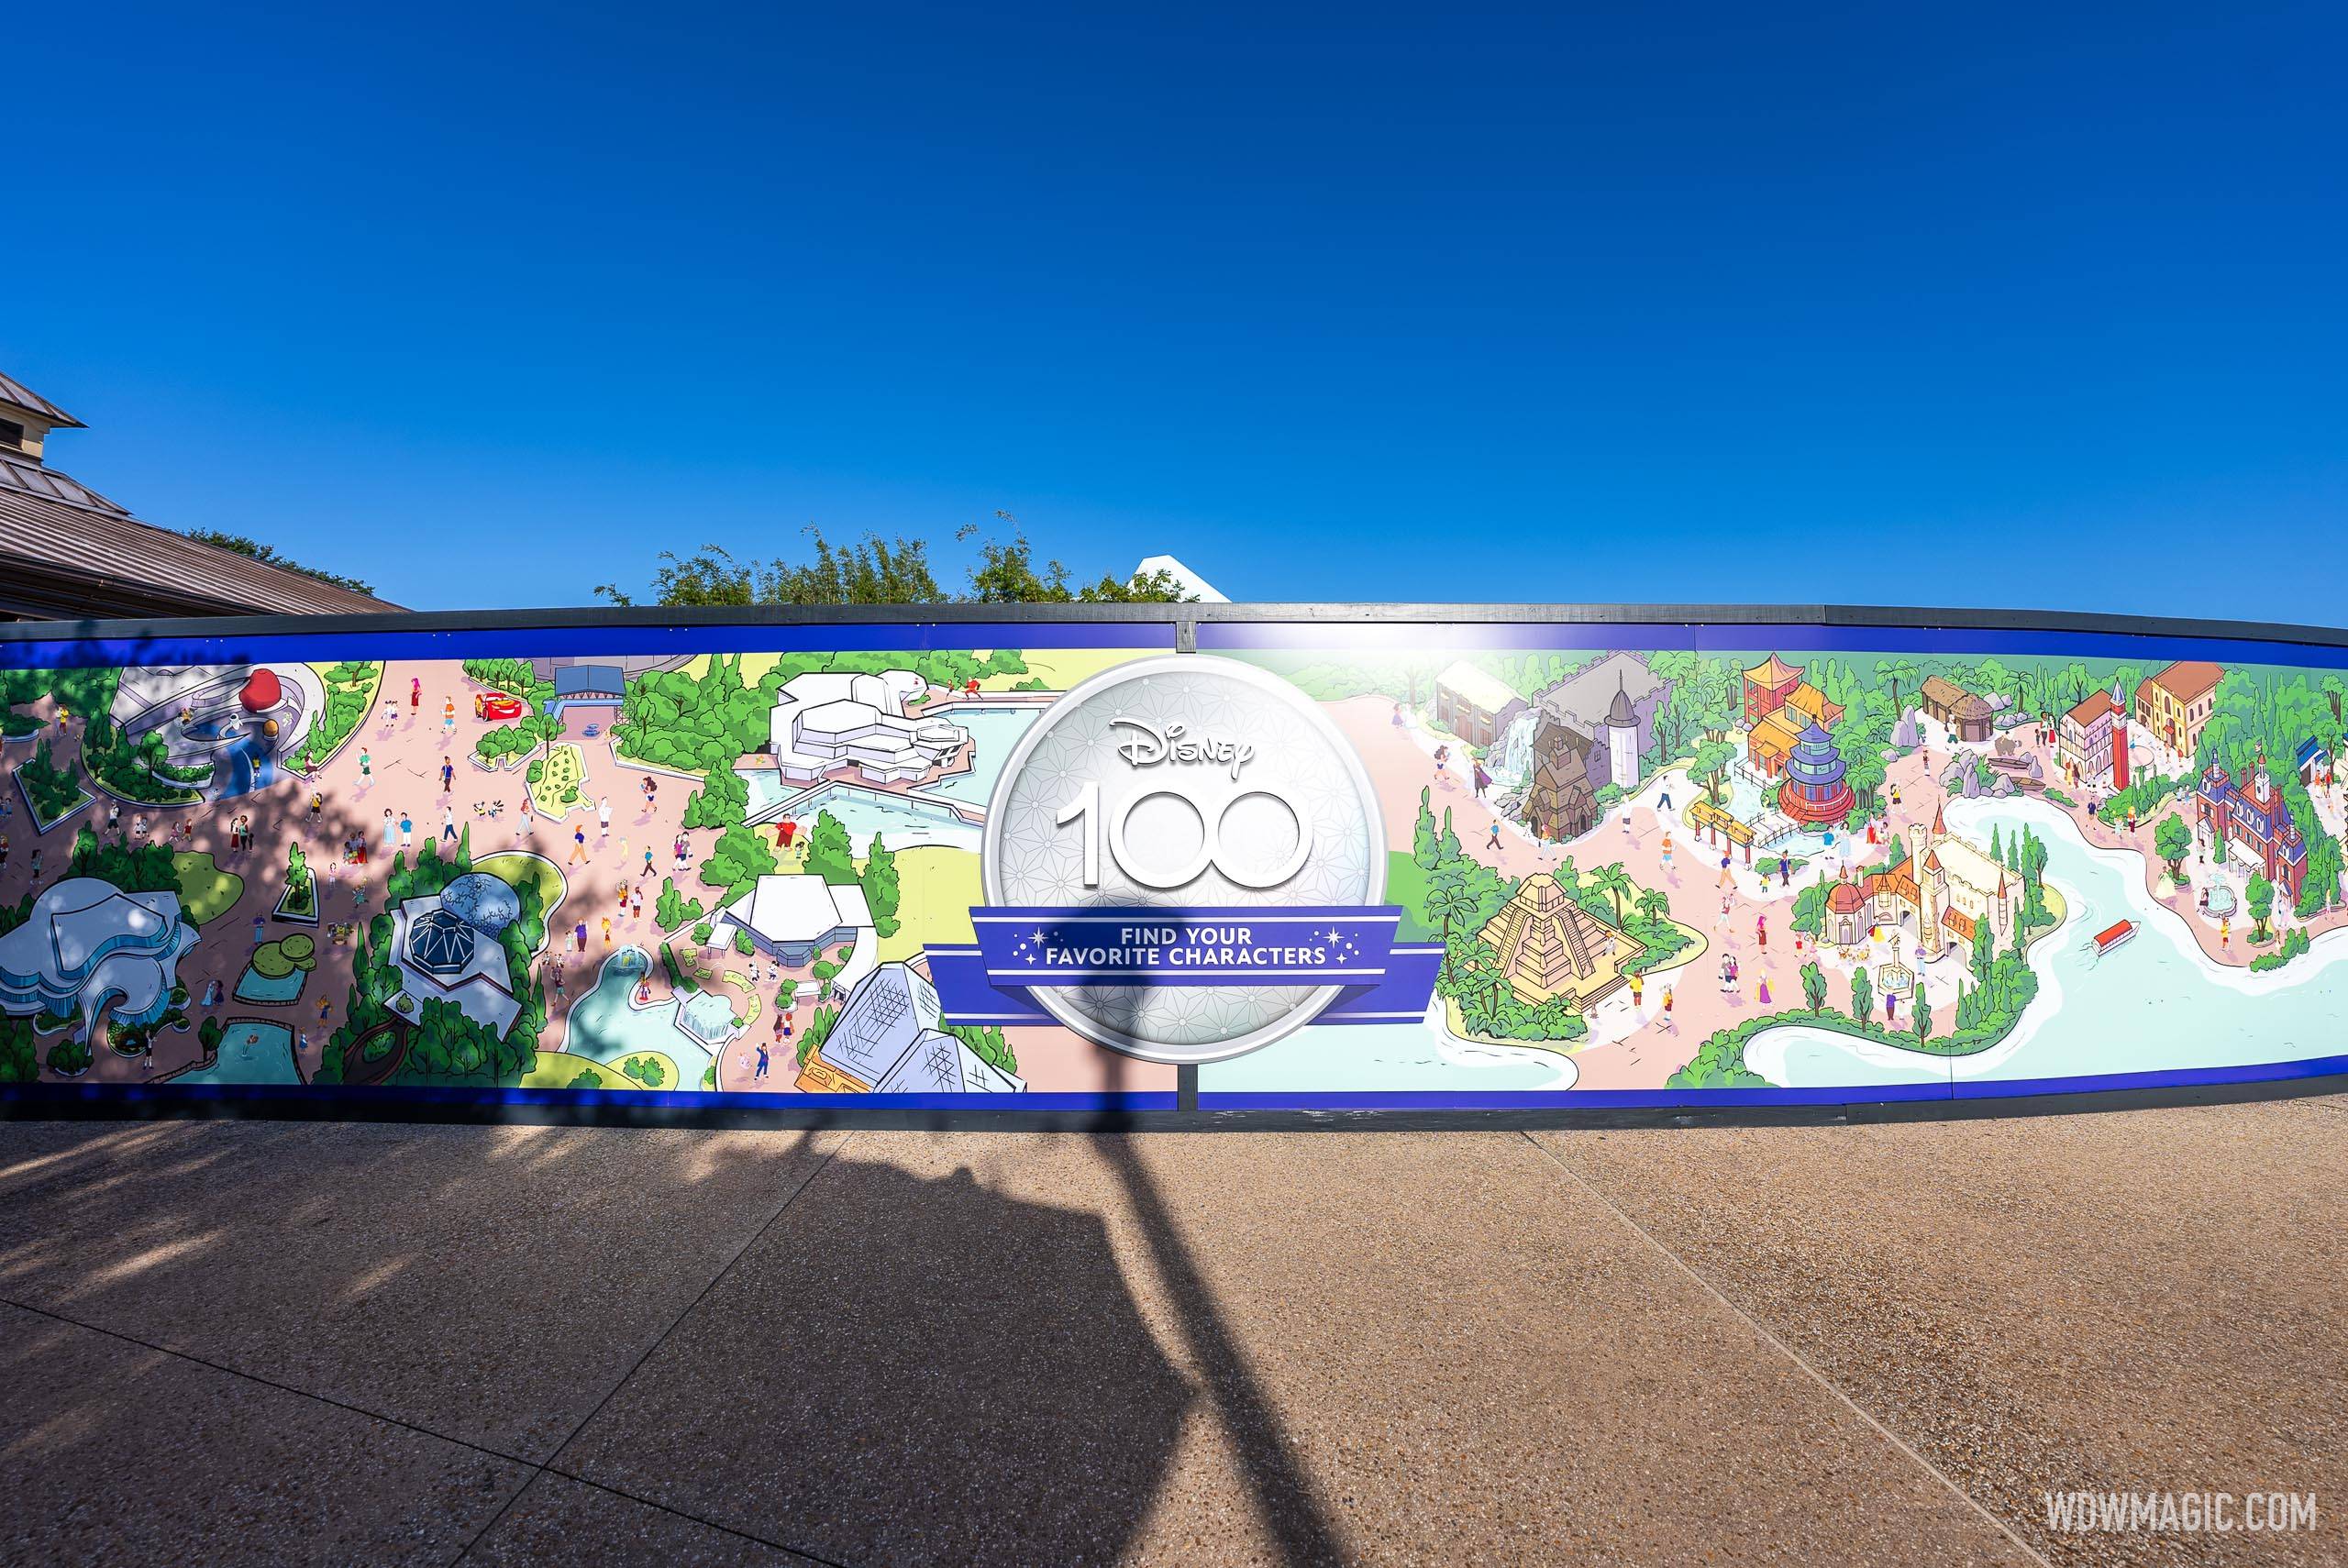 Expansive new character mural spans walkway to World Showcase at EPCOT